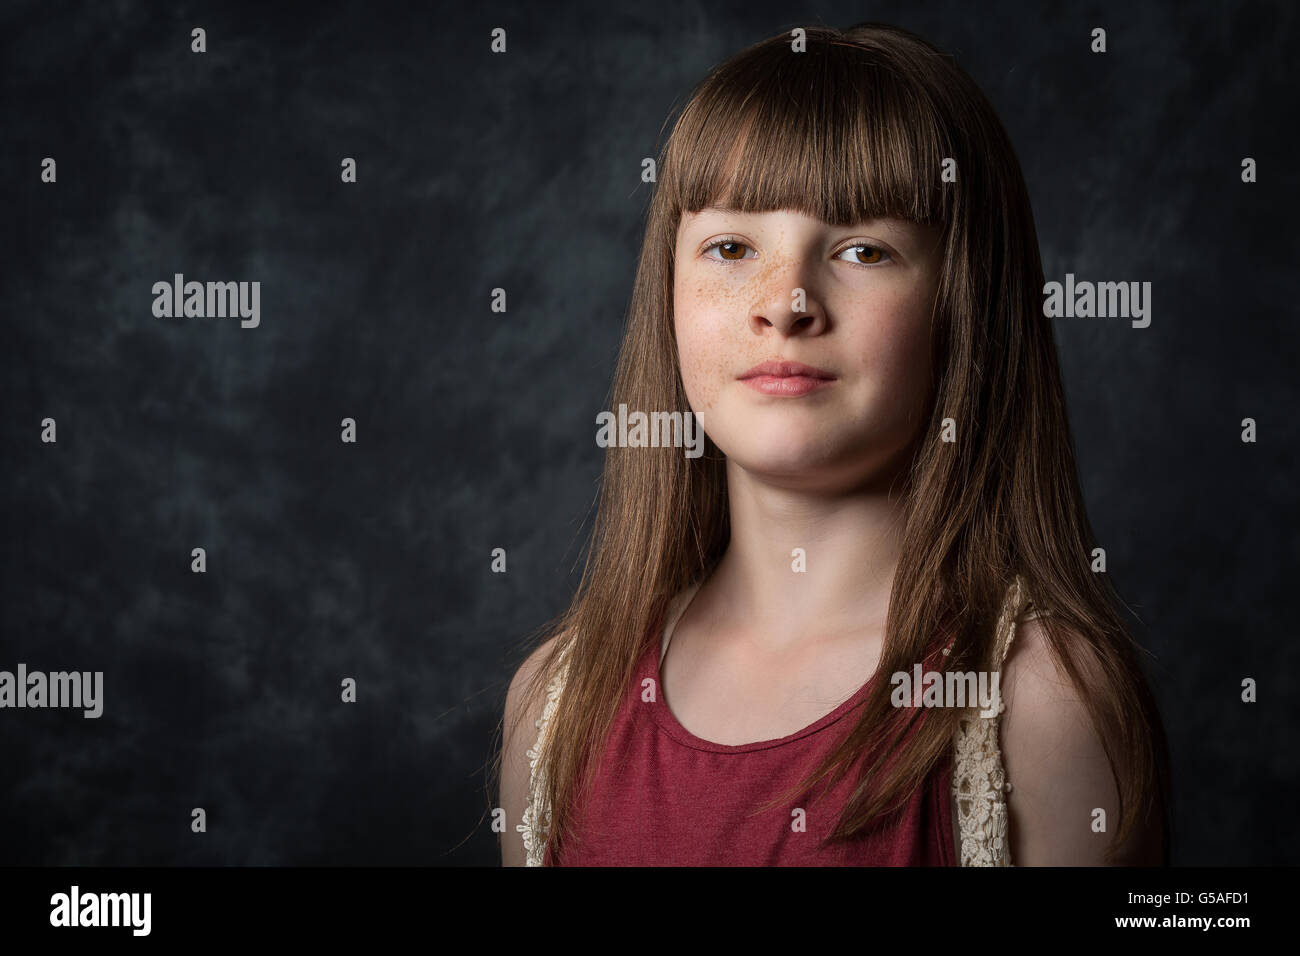 10 Year Old Girl in Red Top Banque D'Images